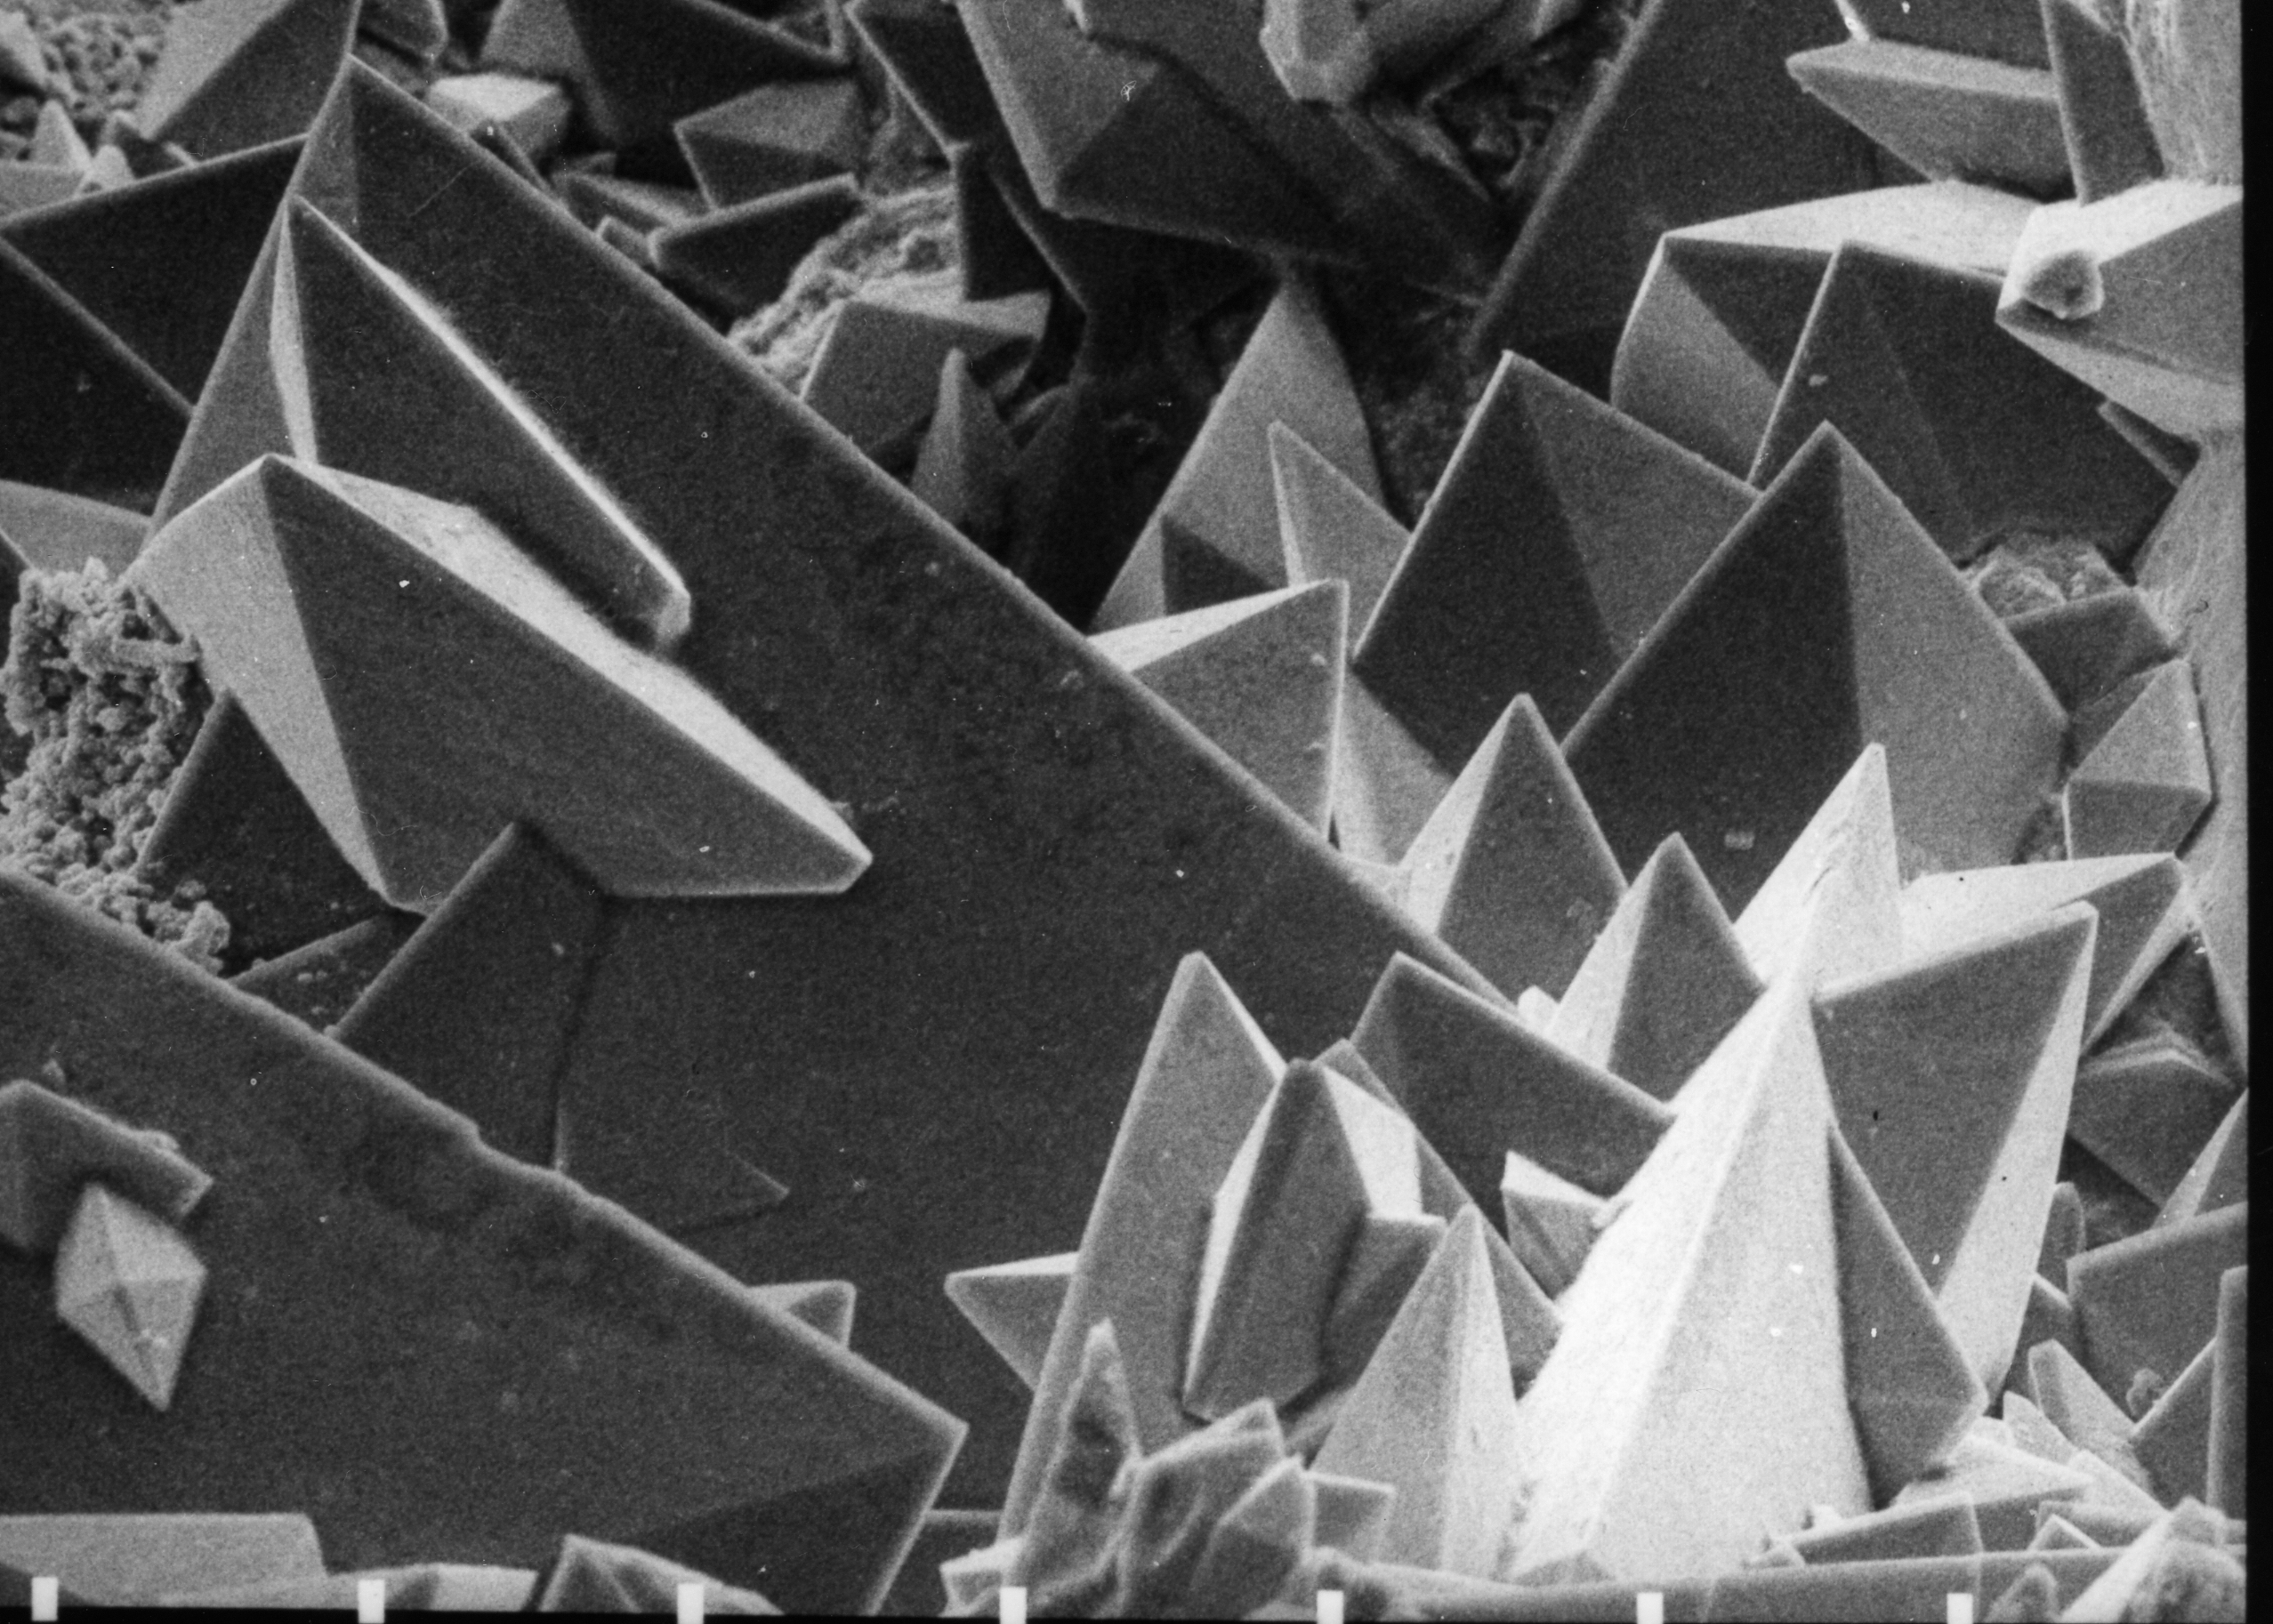 Calcium oxalate dihydrate crystals under Scanning Electron Micrograph (SEM) taken at 30 KV. Source: Wikimedia commons[5]